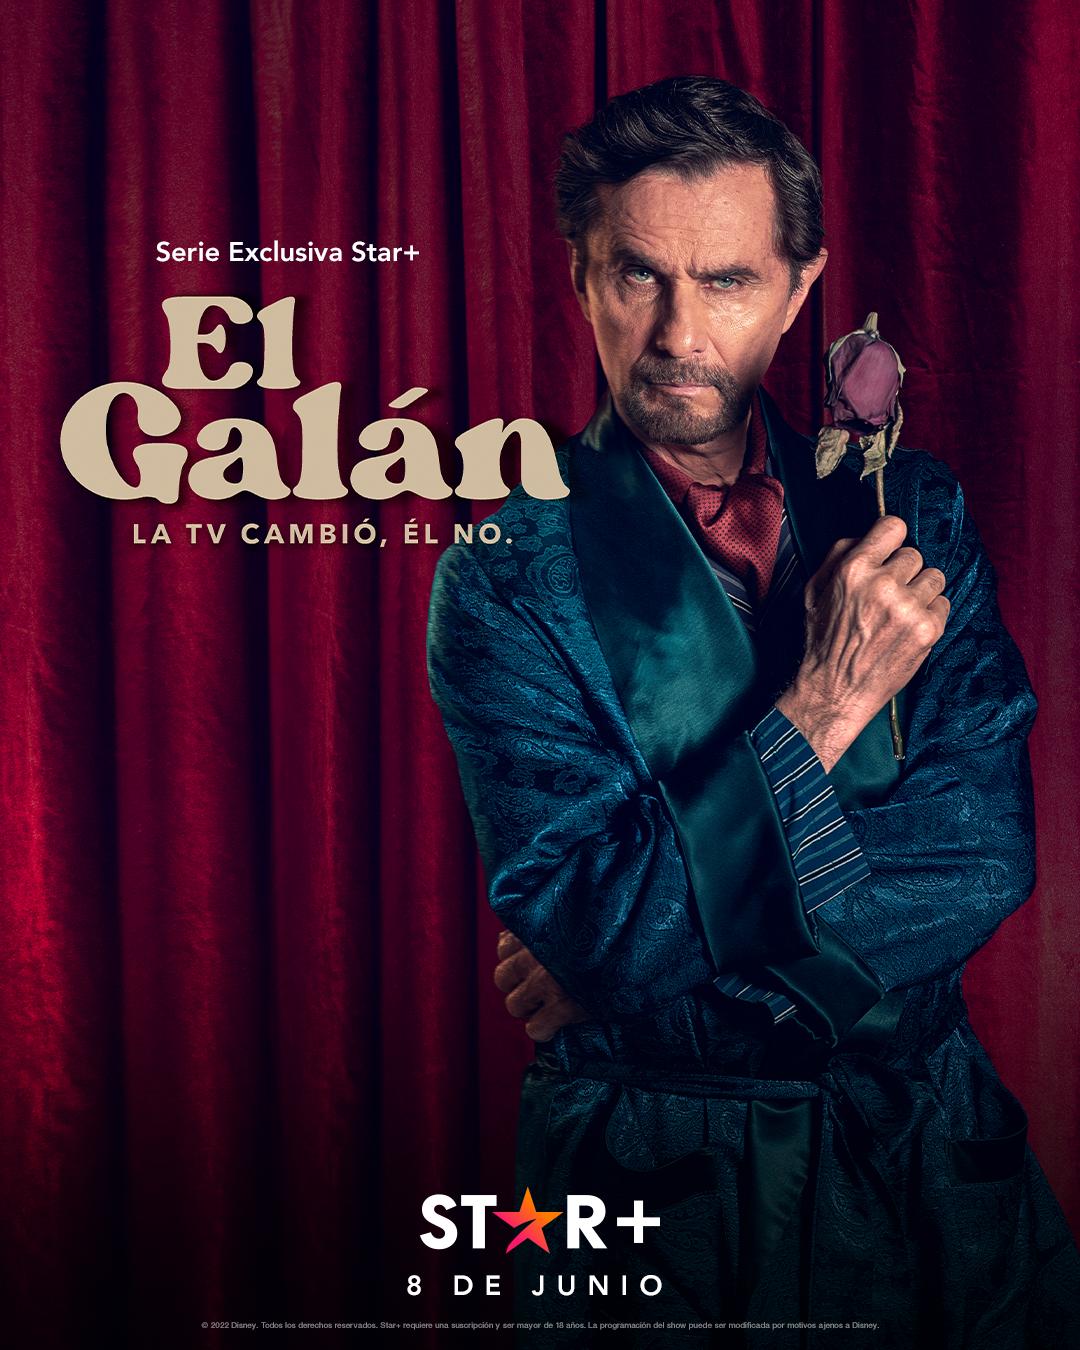 TV ratings for The Gallant. TV Changed, He Didn't (El Galán. La Tv Cambió, Él No) in Thailand. Star+ TV series